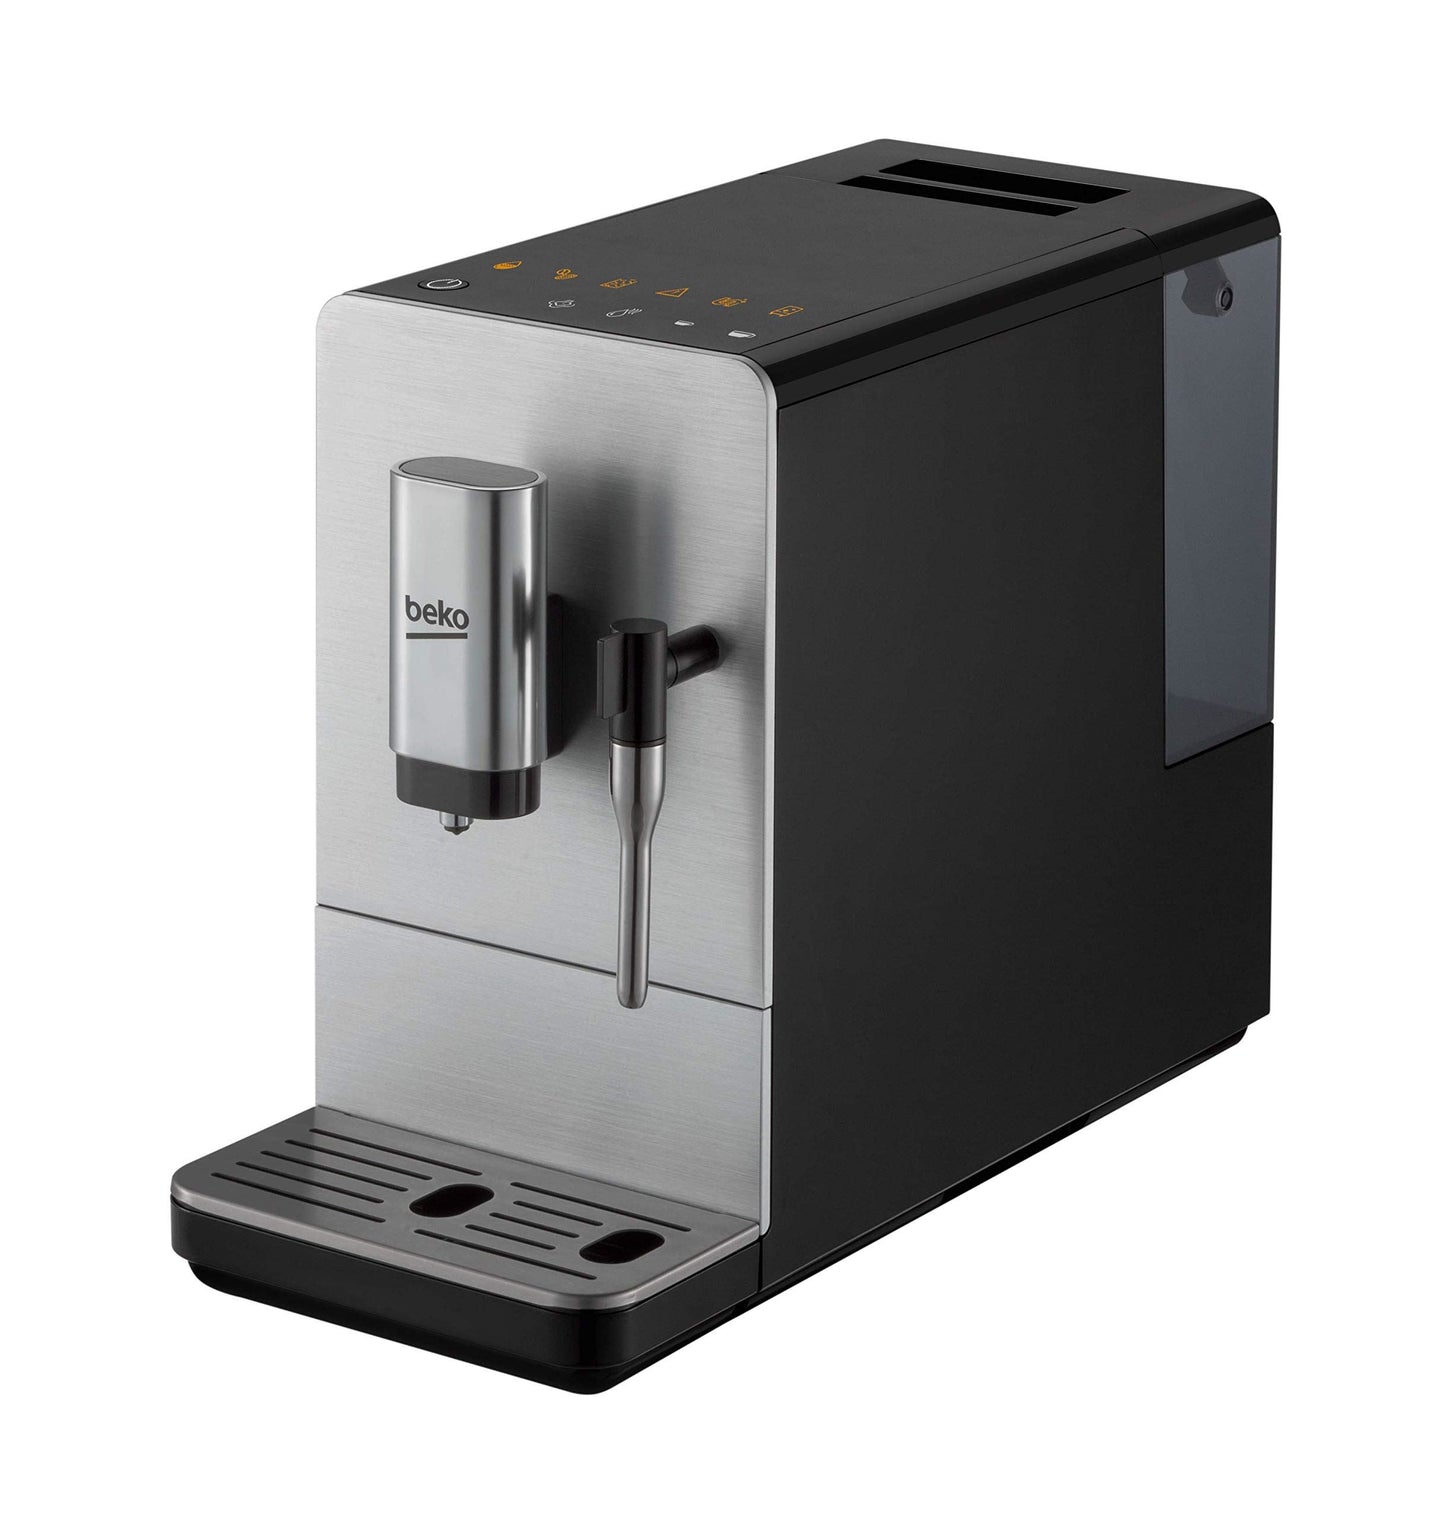 Beko 8814253200 Bean to Cup Coffee Machine CEG5311X 19 Bar Pressure-Stainless Steel, Includes Steam Nozzle for Milk Frothing, One Touch LCD Control & Removable 1.6L Water Tank, 1.6 liters